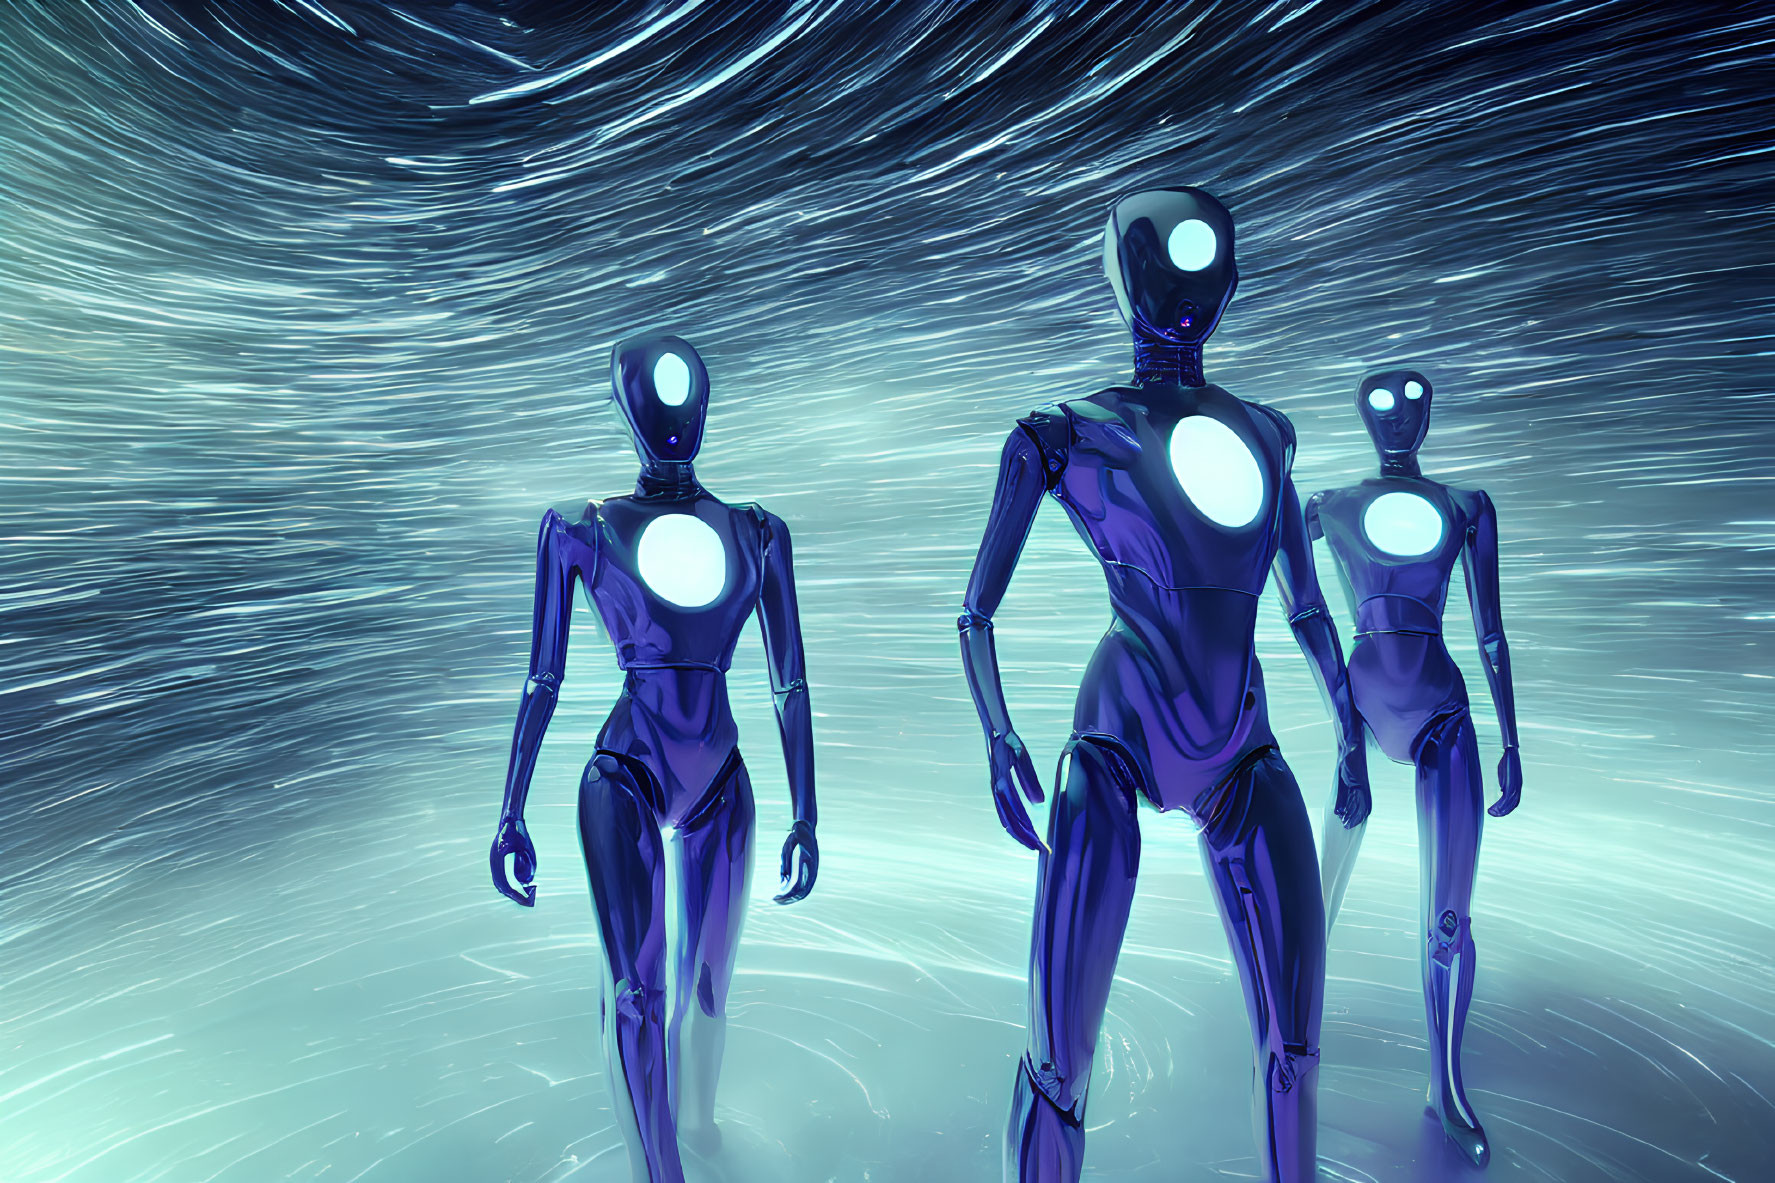 Three humanoid robots with glowing chests on blue energy background